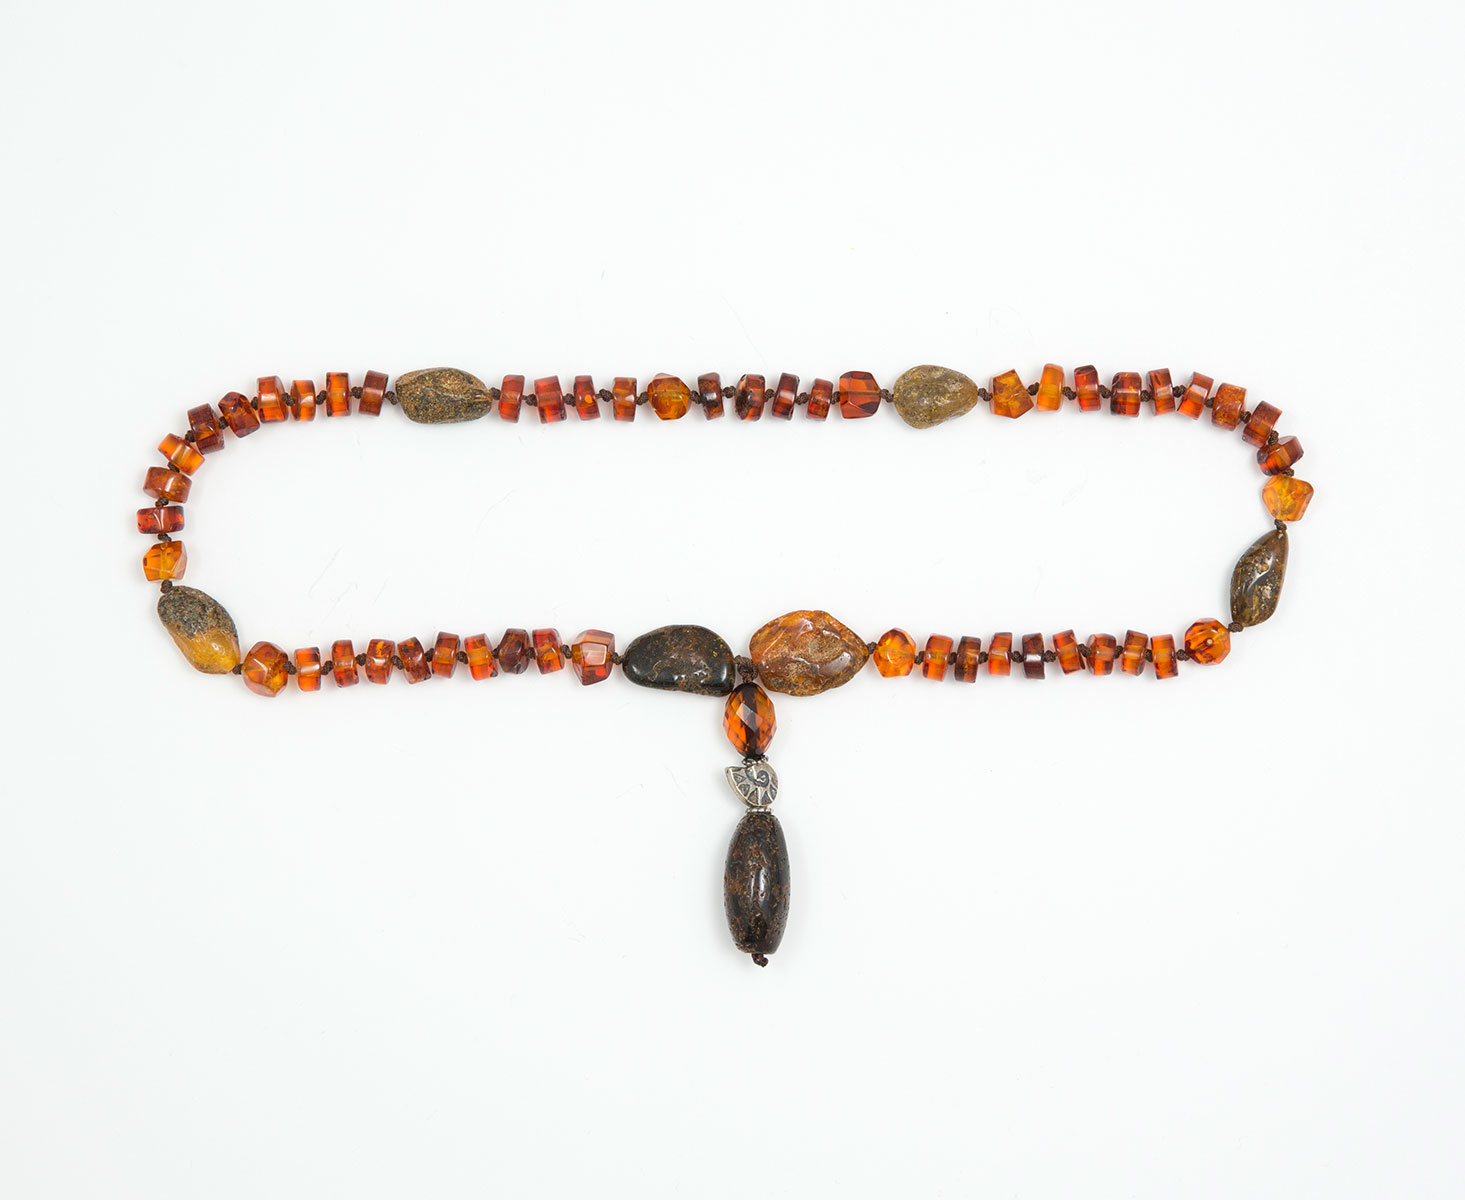 Catholic prayer object-Rosary-made of genuine amber from Baltic sea - cut by hand. silver